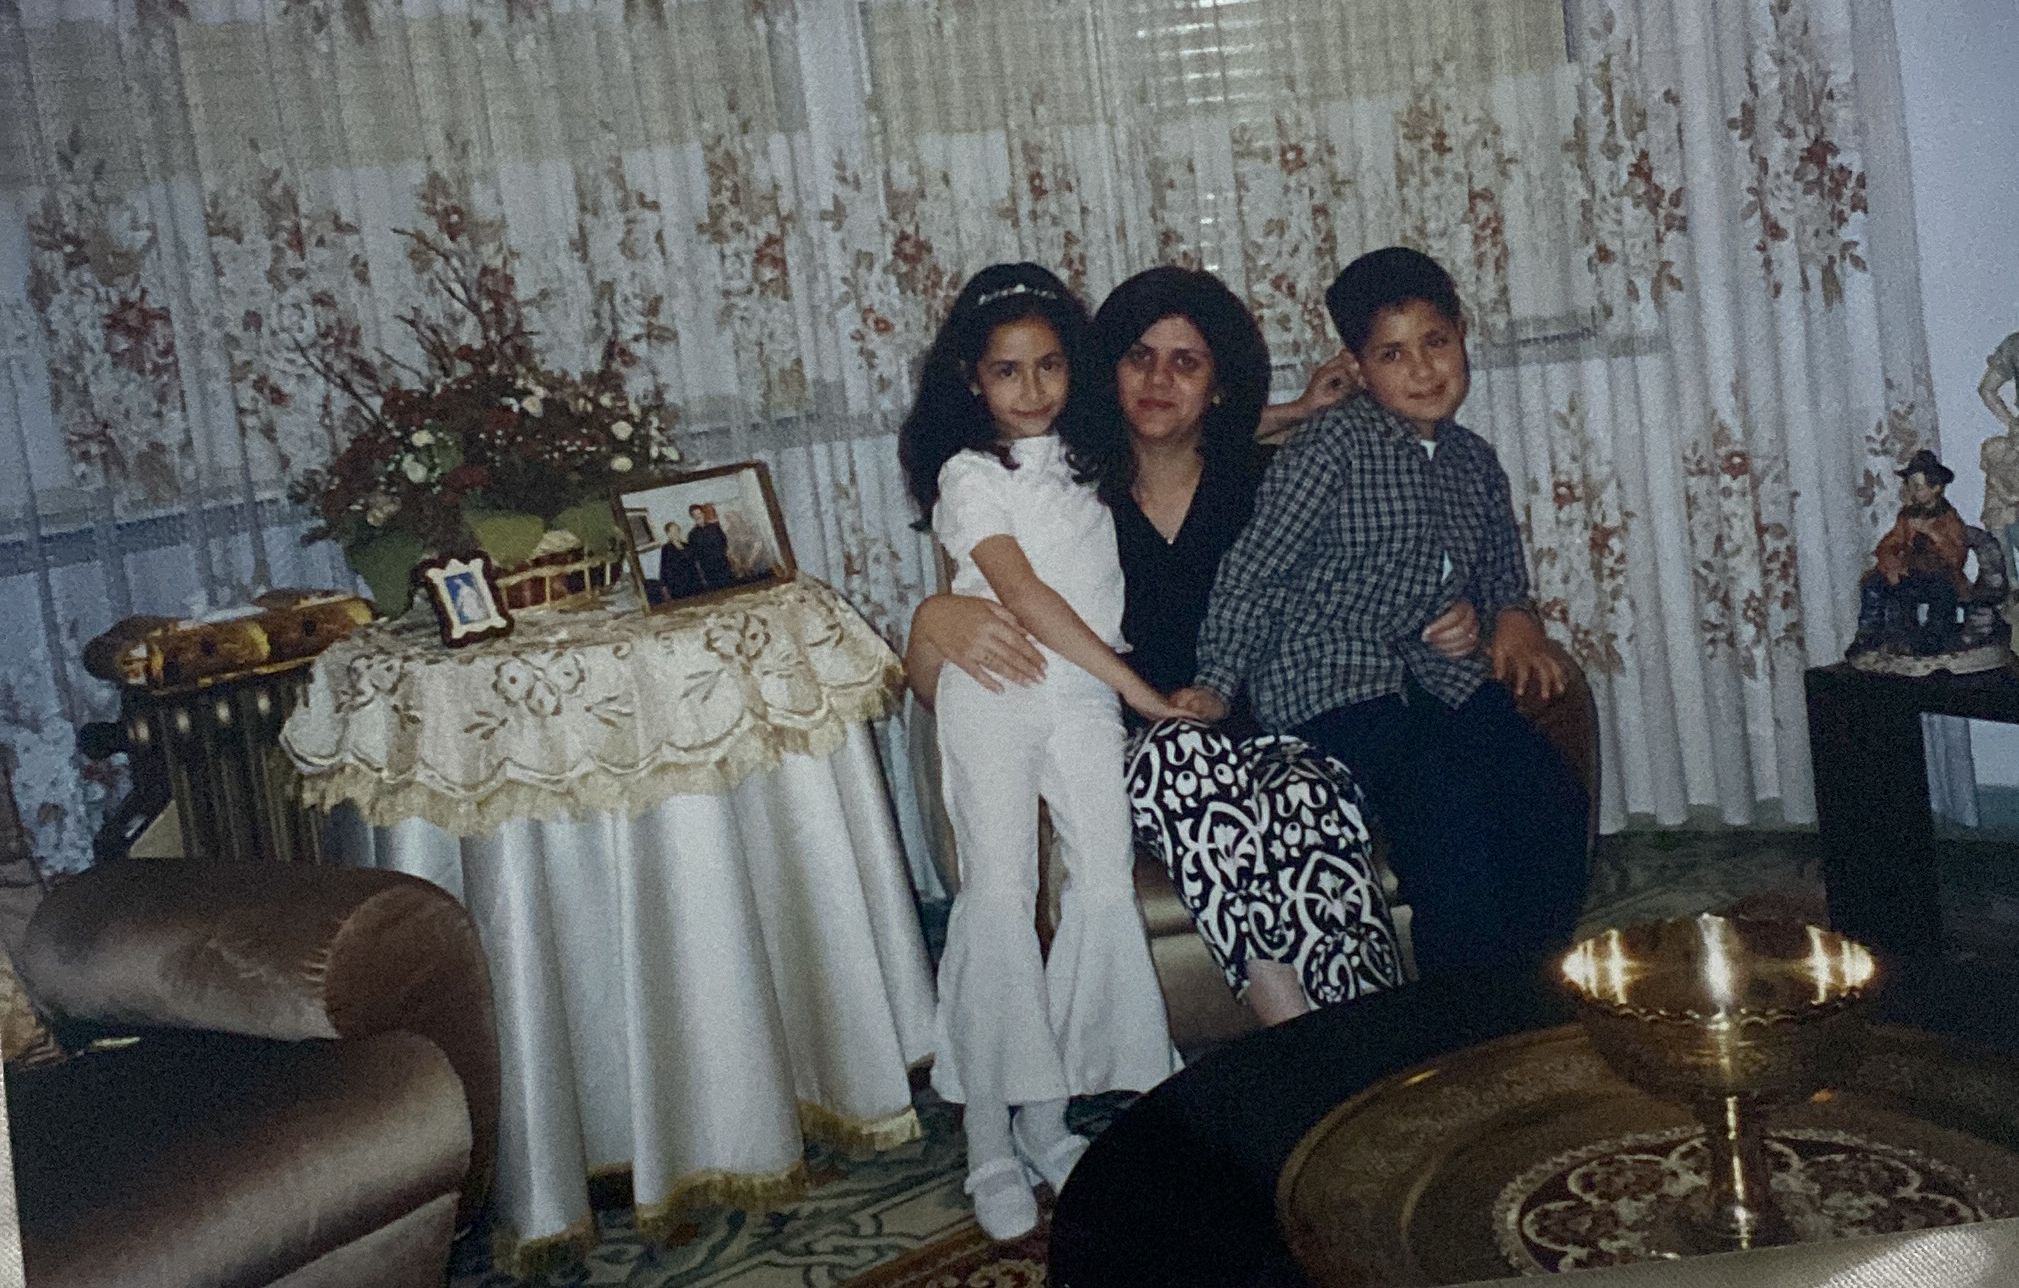 Lina Abu Akleh and her brother pictured with their aunt, Shireen Abu Akleh, as children. (Courtesy of Lina Abu Akleh)